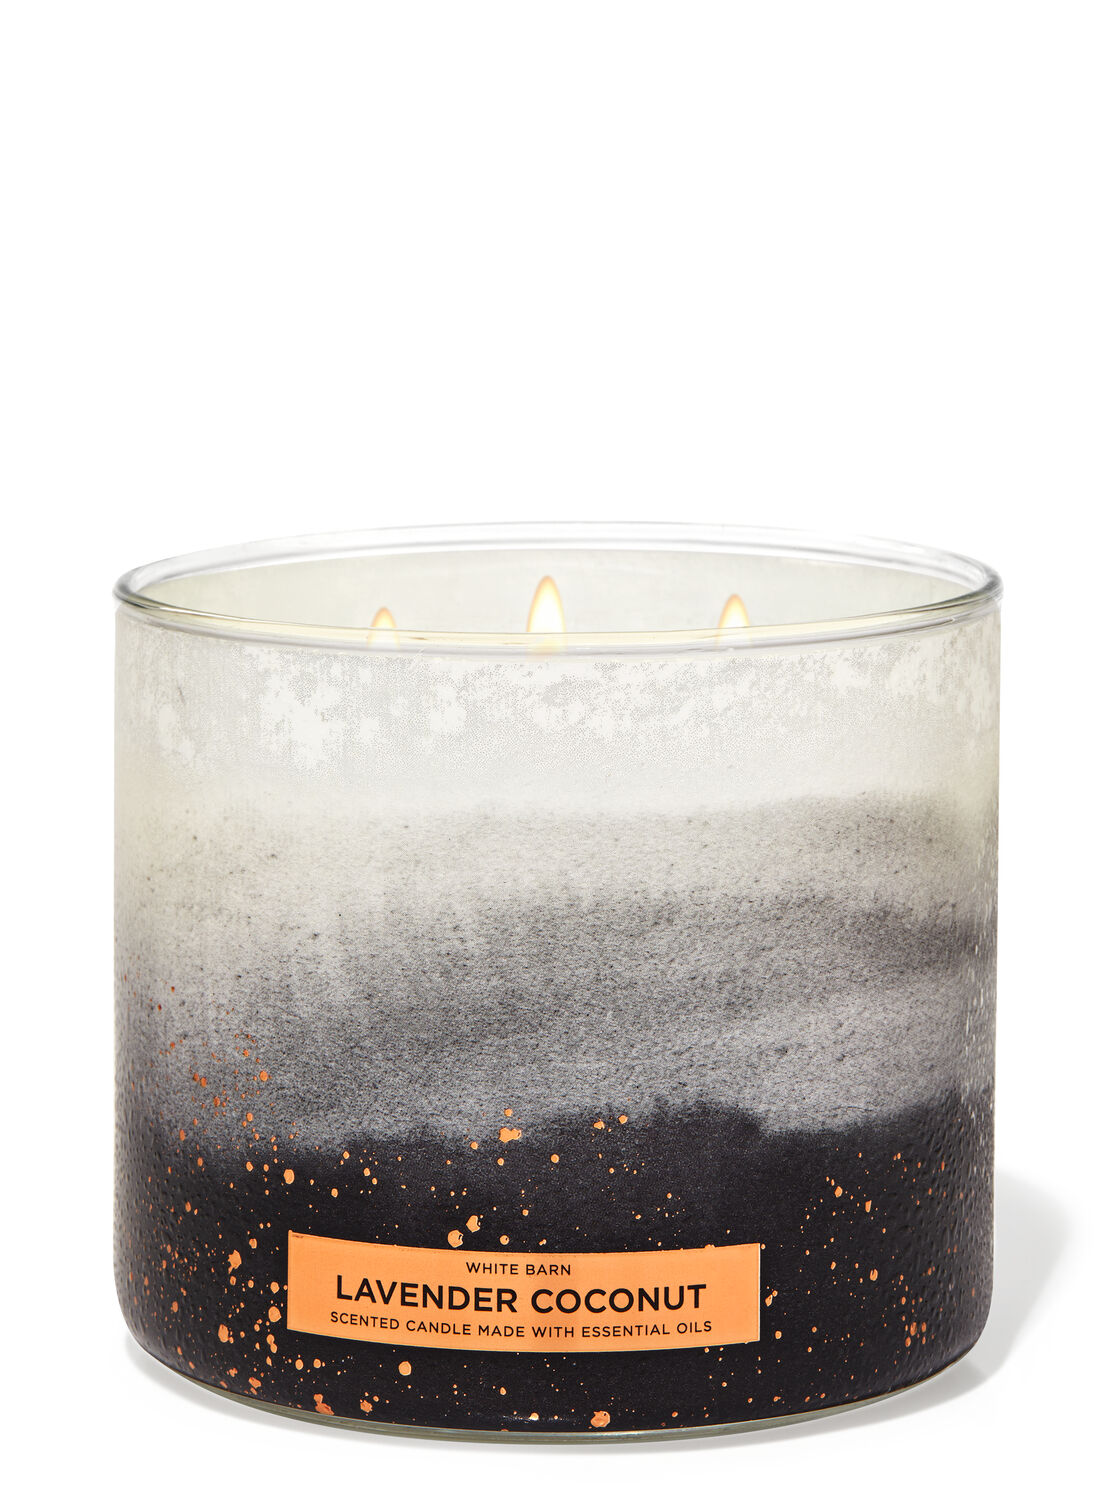 Lavender Coconut 3-Wick Candle